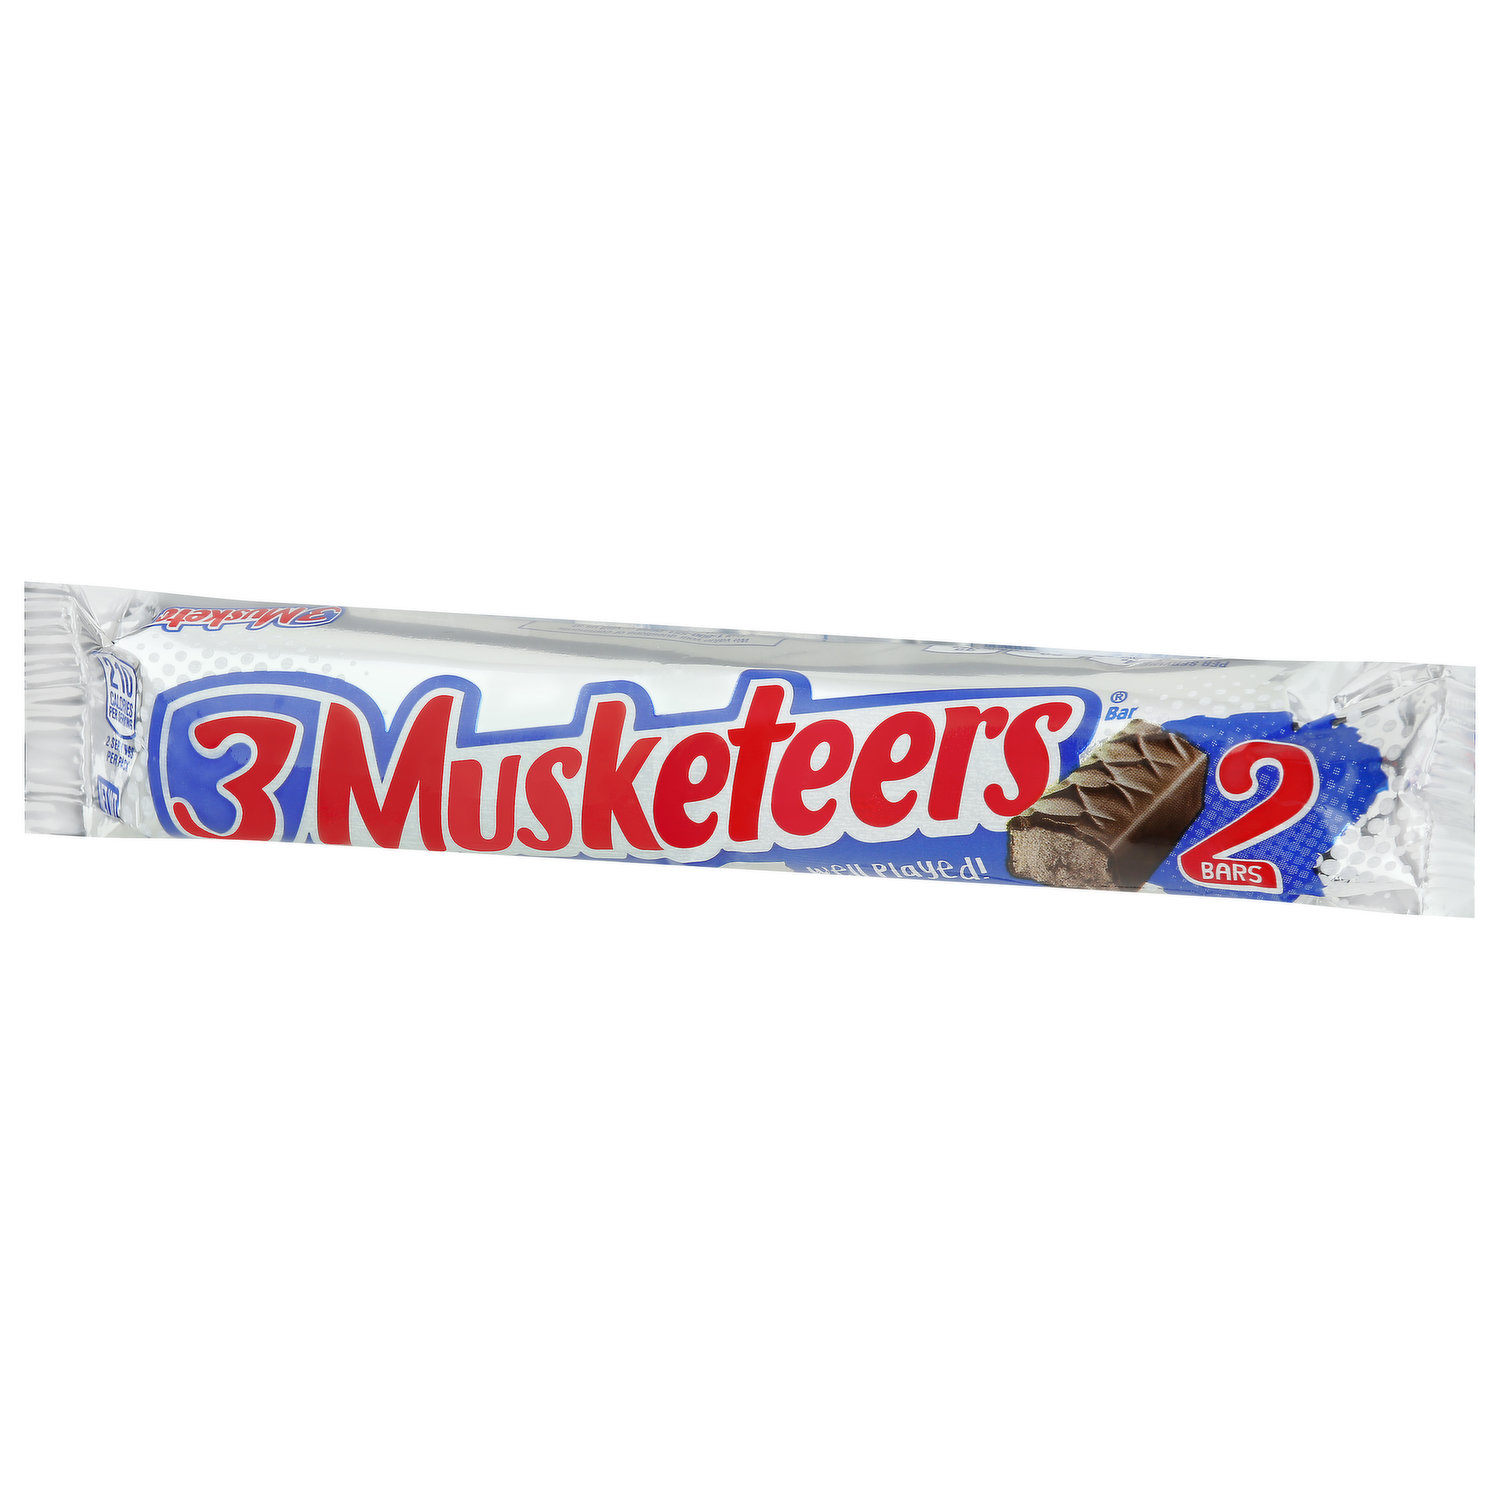 3 Musketeers Fun Size Chocolate Candy with Silver Wrapper